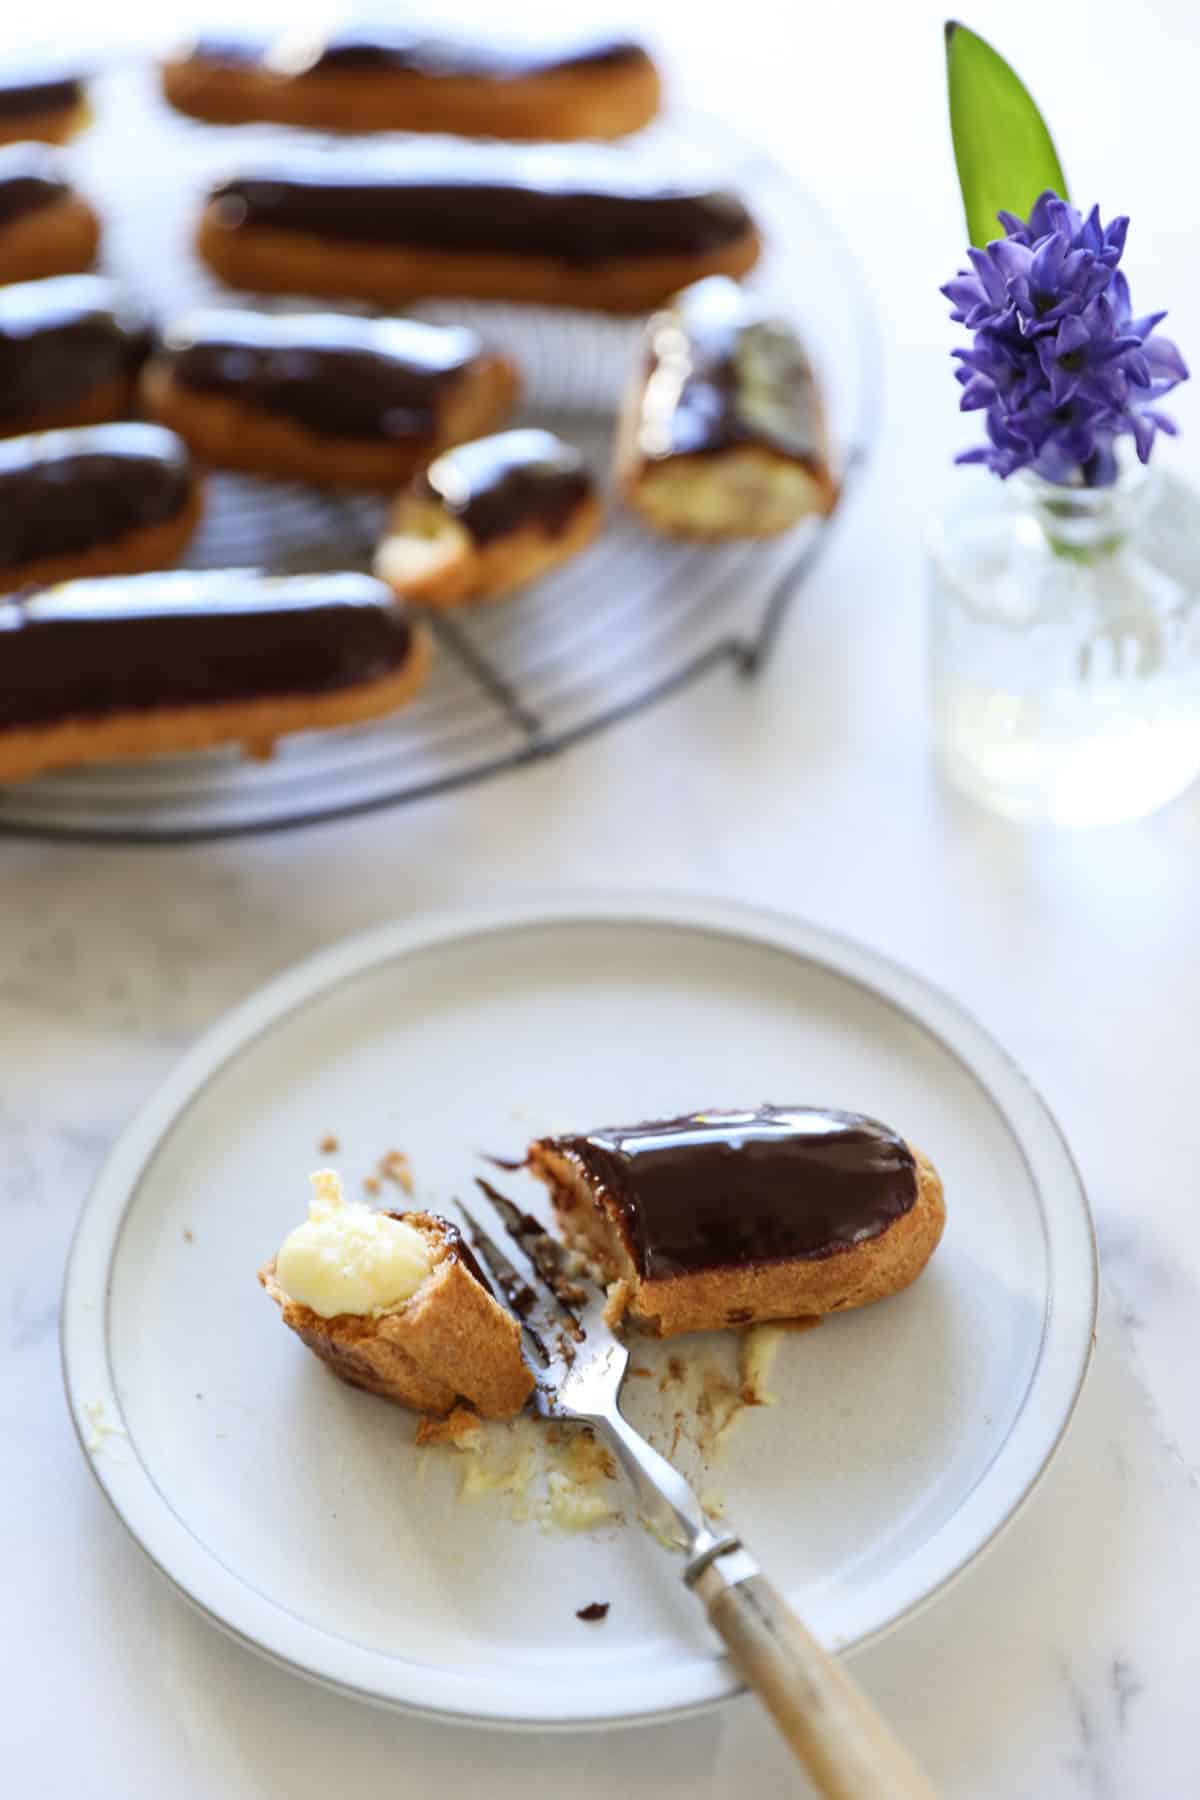 an eclair with a chocolate glaze and fork taking a bite